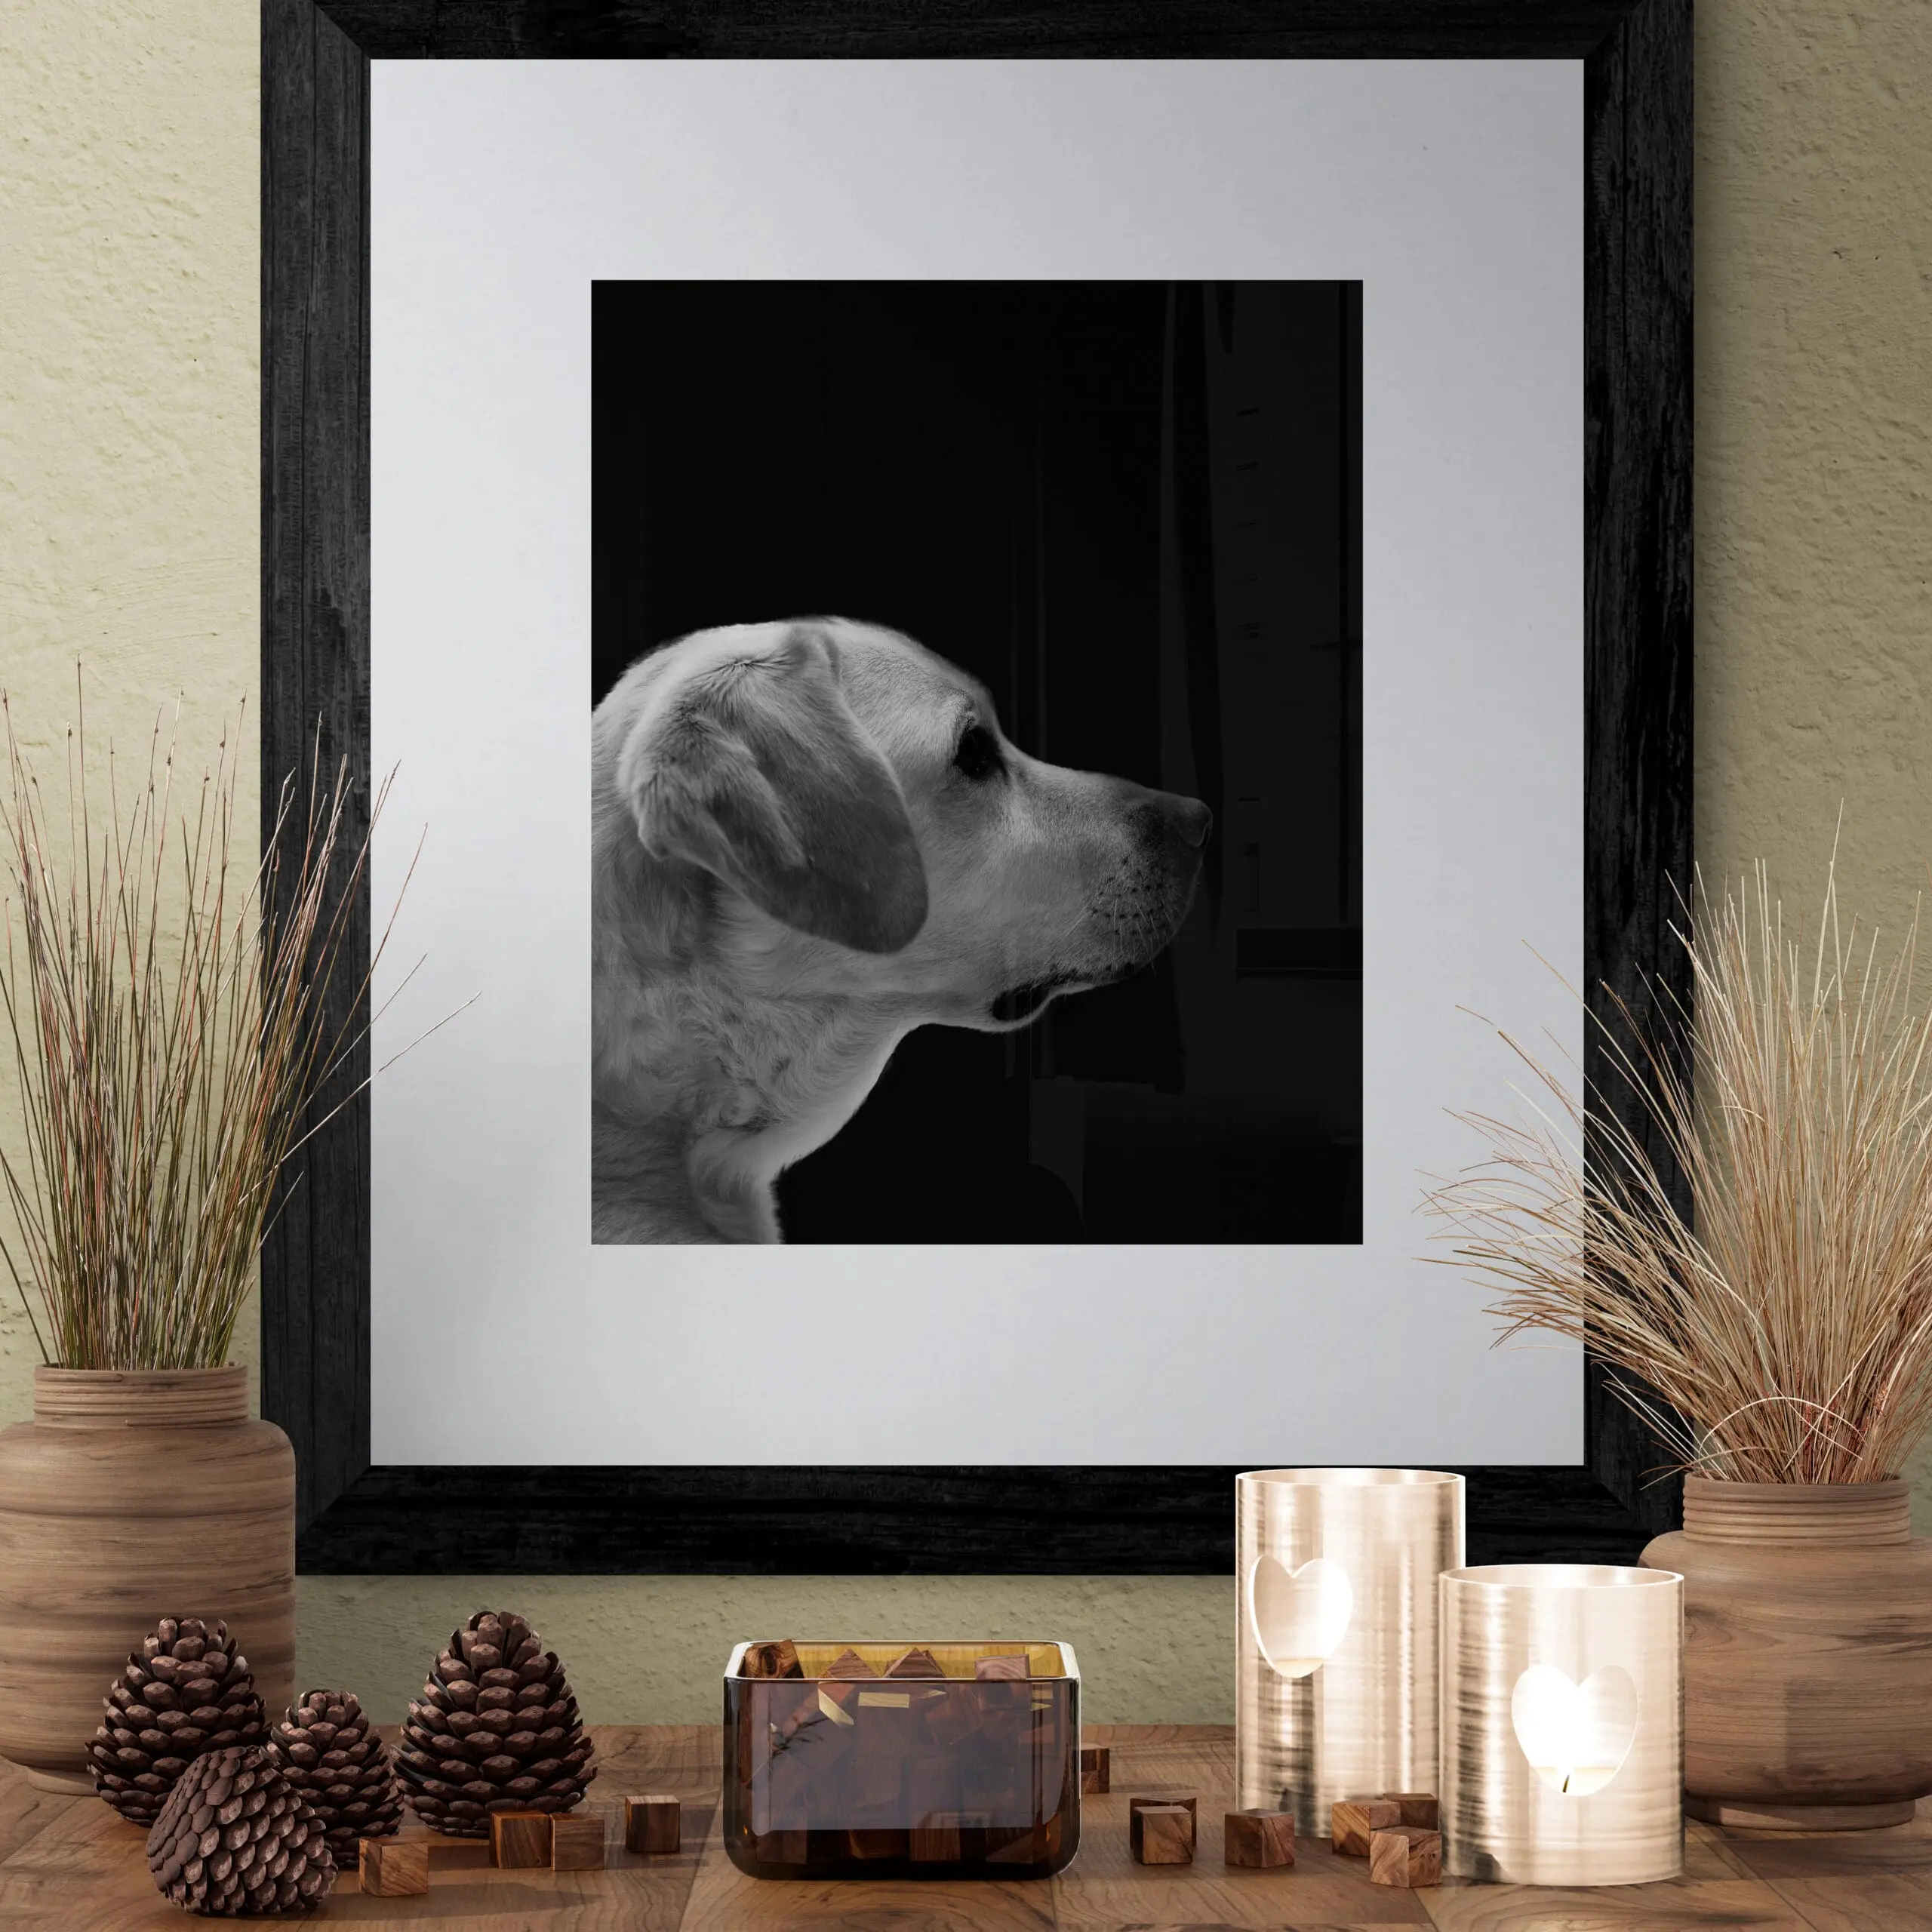 Mister Karu, a gorgeous blond labrador in a black and white close-up.